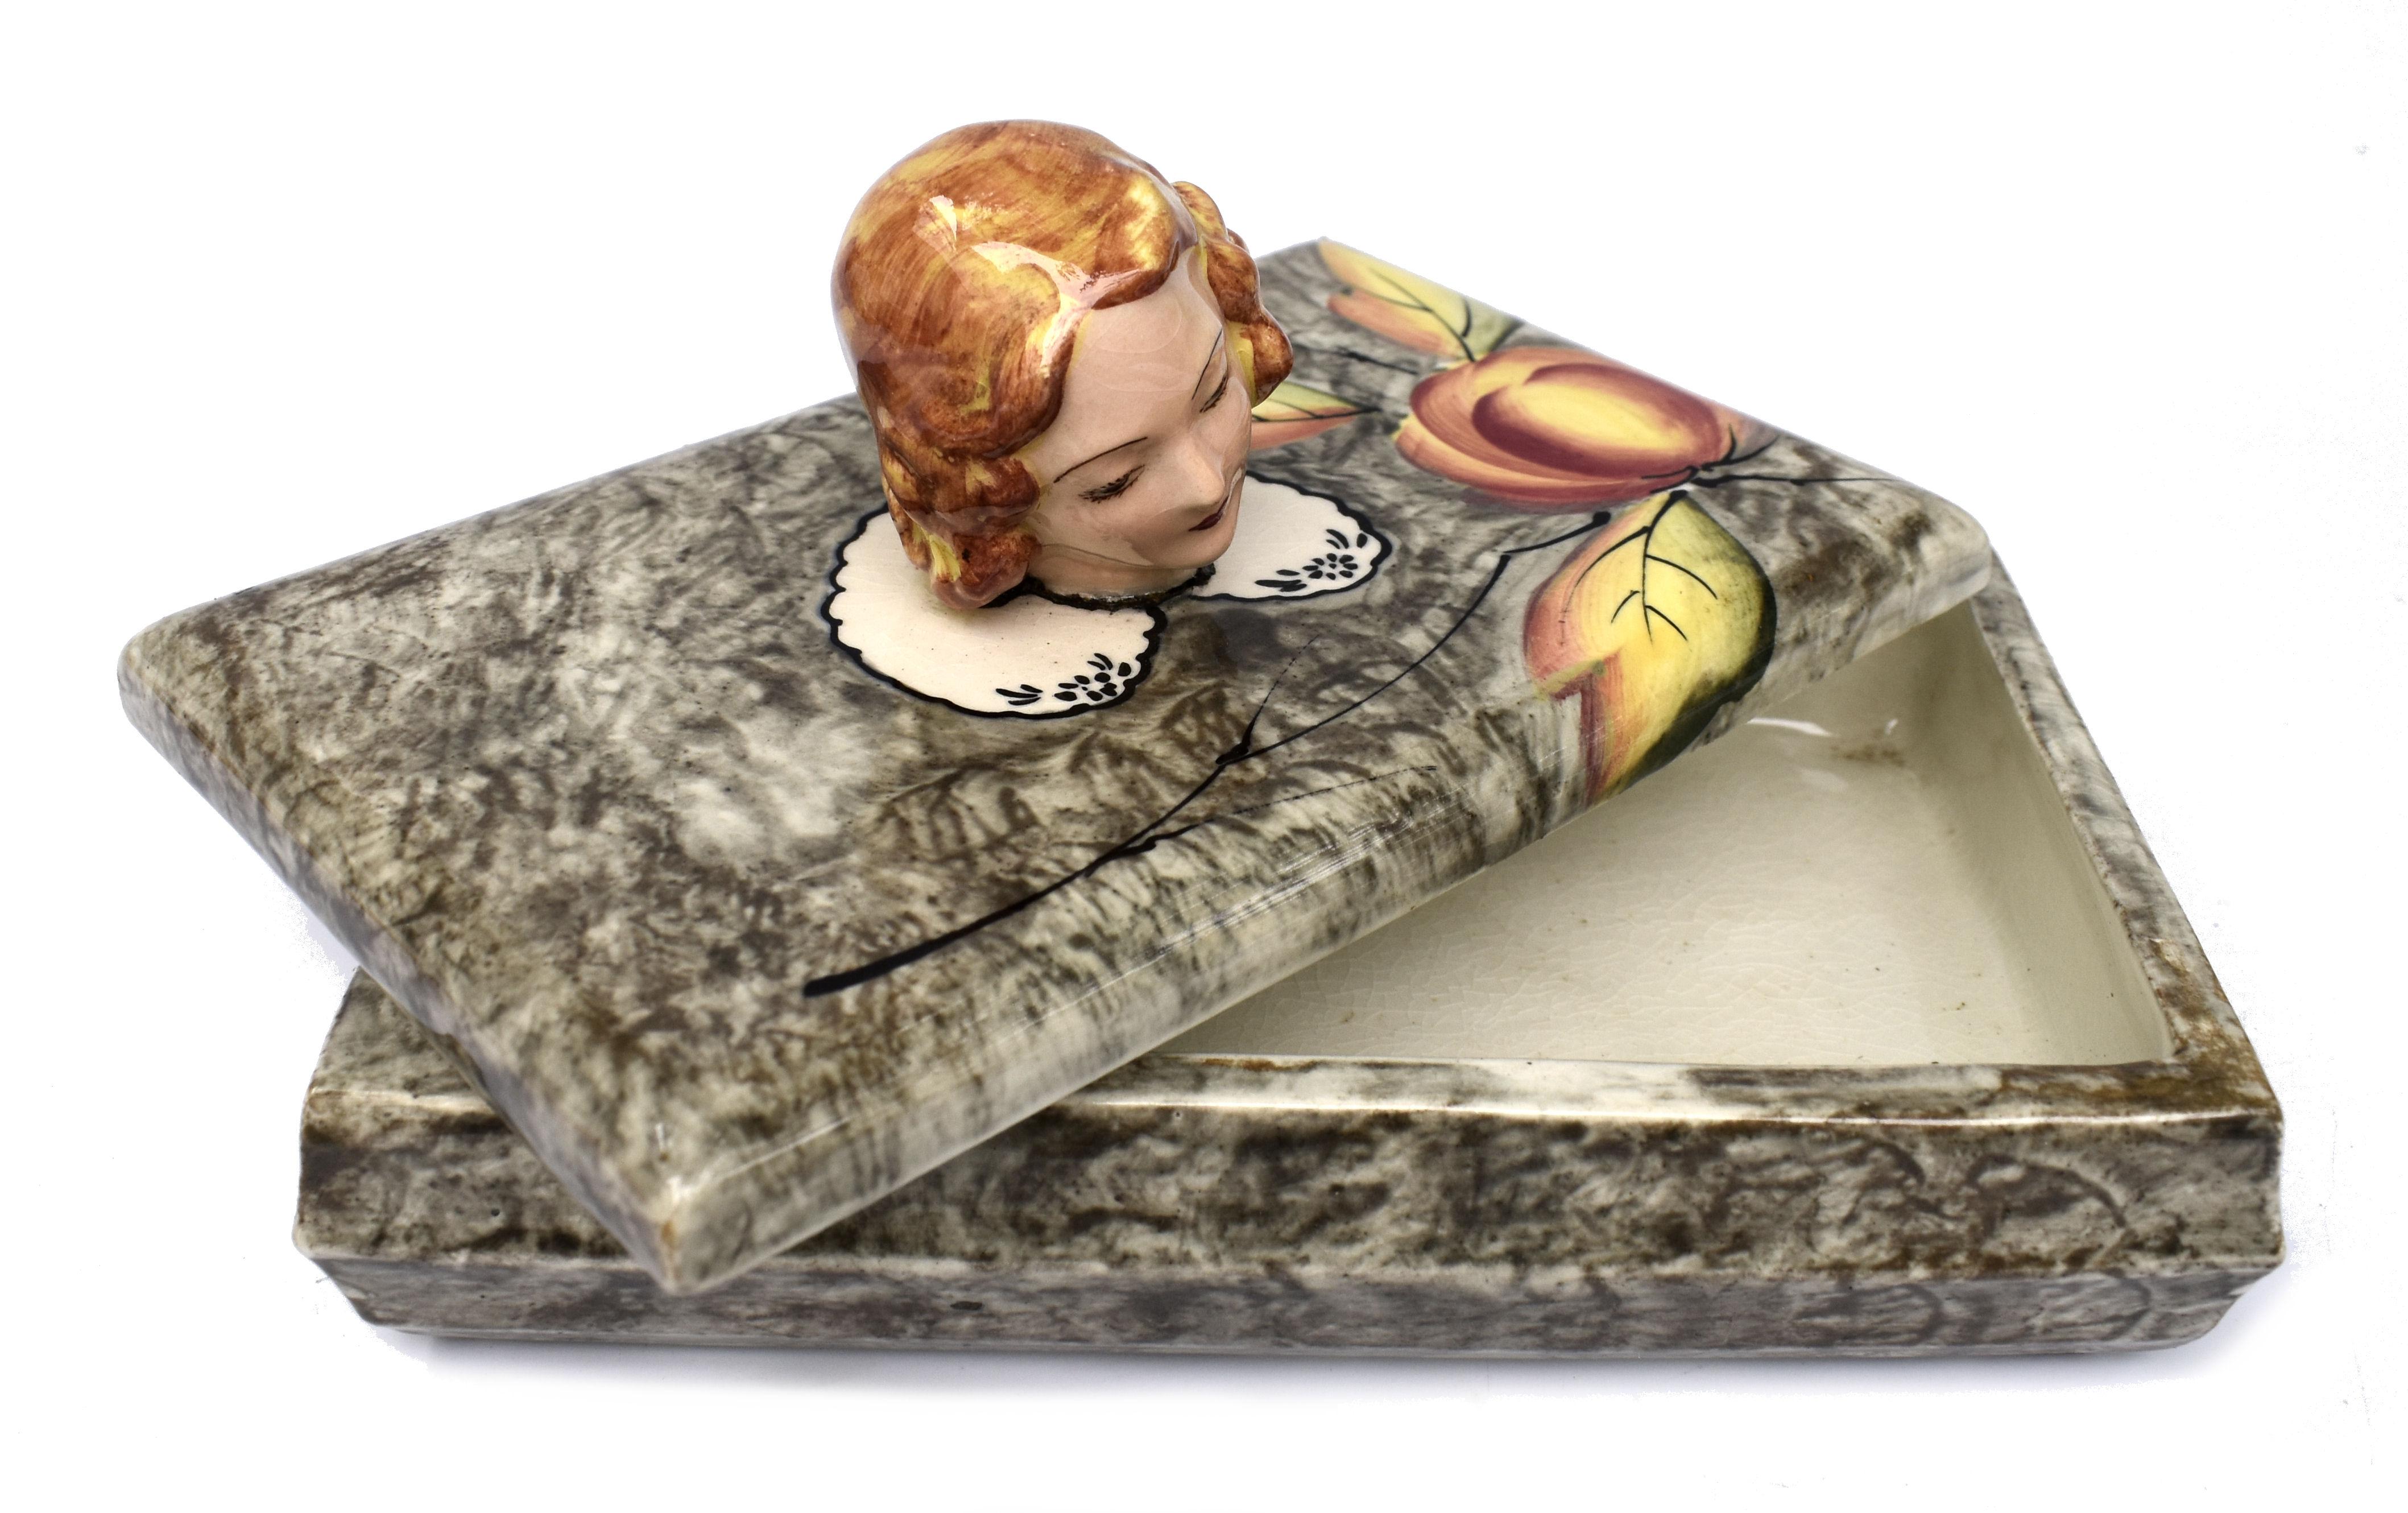 For your consideration is this truly fabulous Art deco ceramic trinket box which was made by Goldscheider in collaboration with Myott and Sons c1930. Anyone who collects Art Deco vanity items, powder boxes, trinket or half dolls will appreciate this